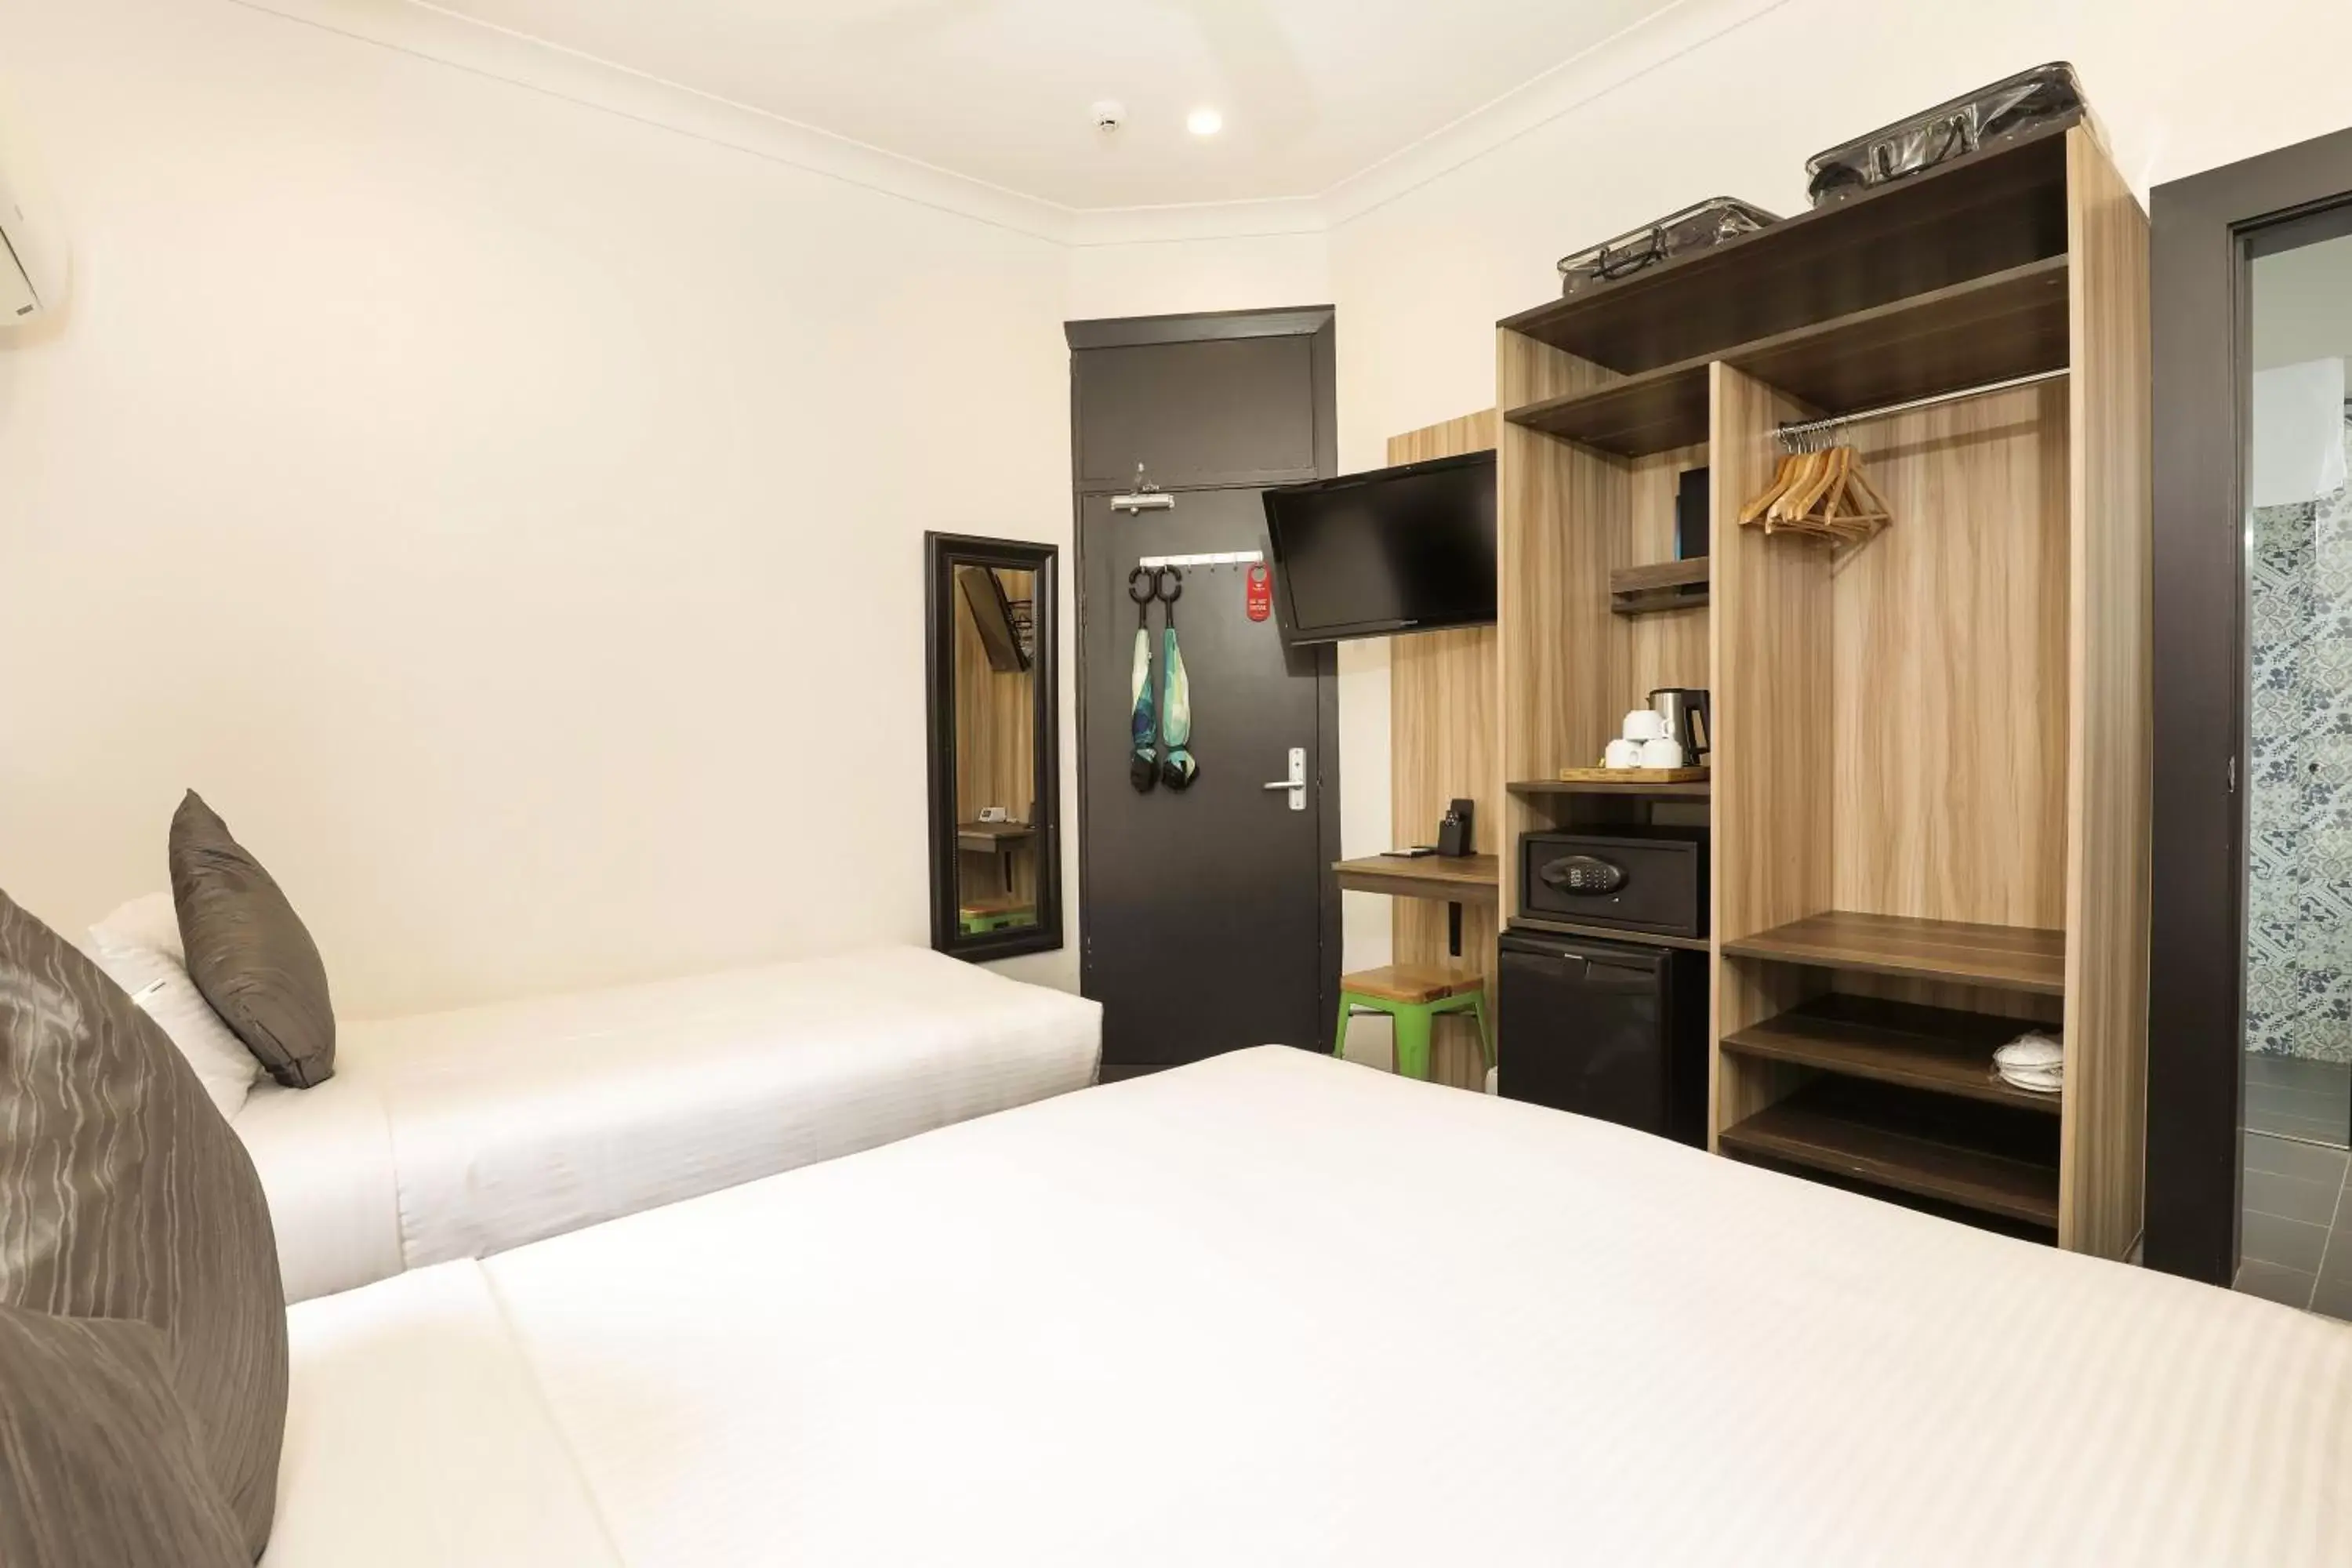 Triple Room with Private Bathroom in Glenferrie Lodge